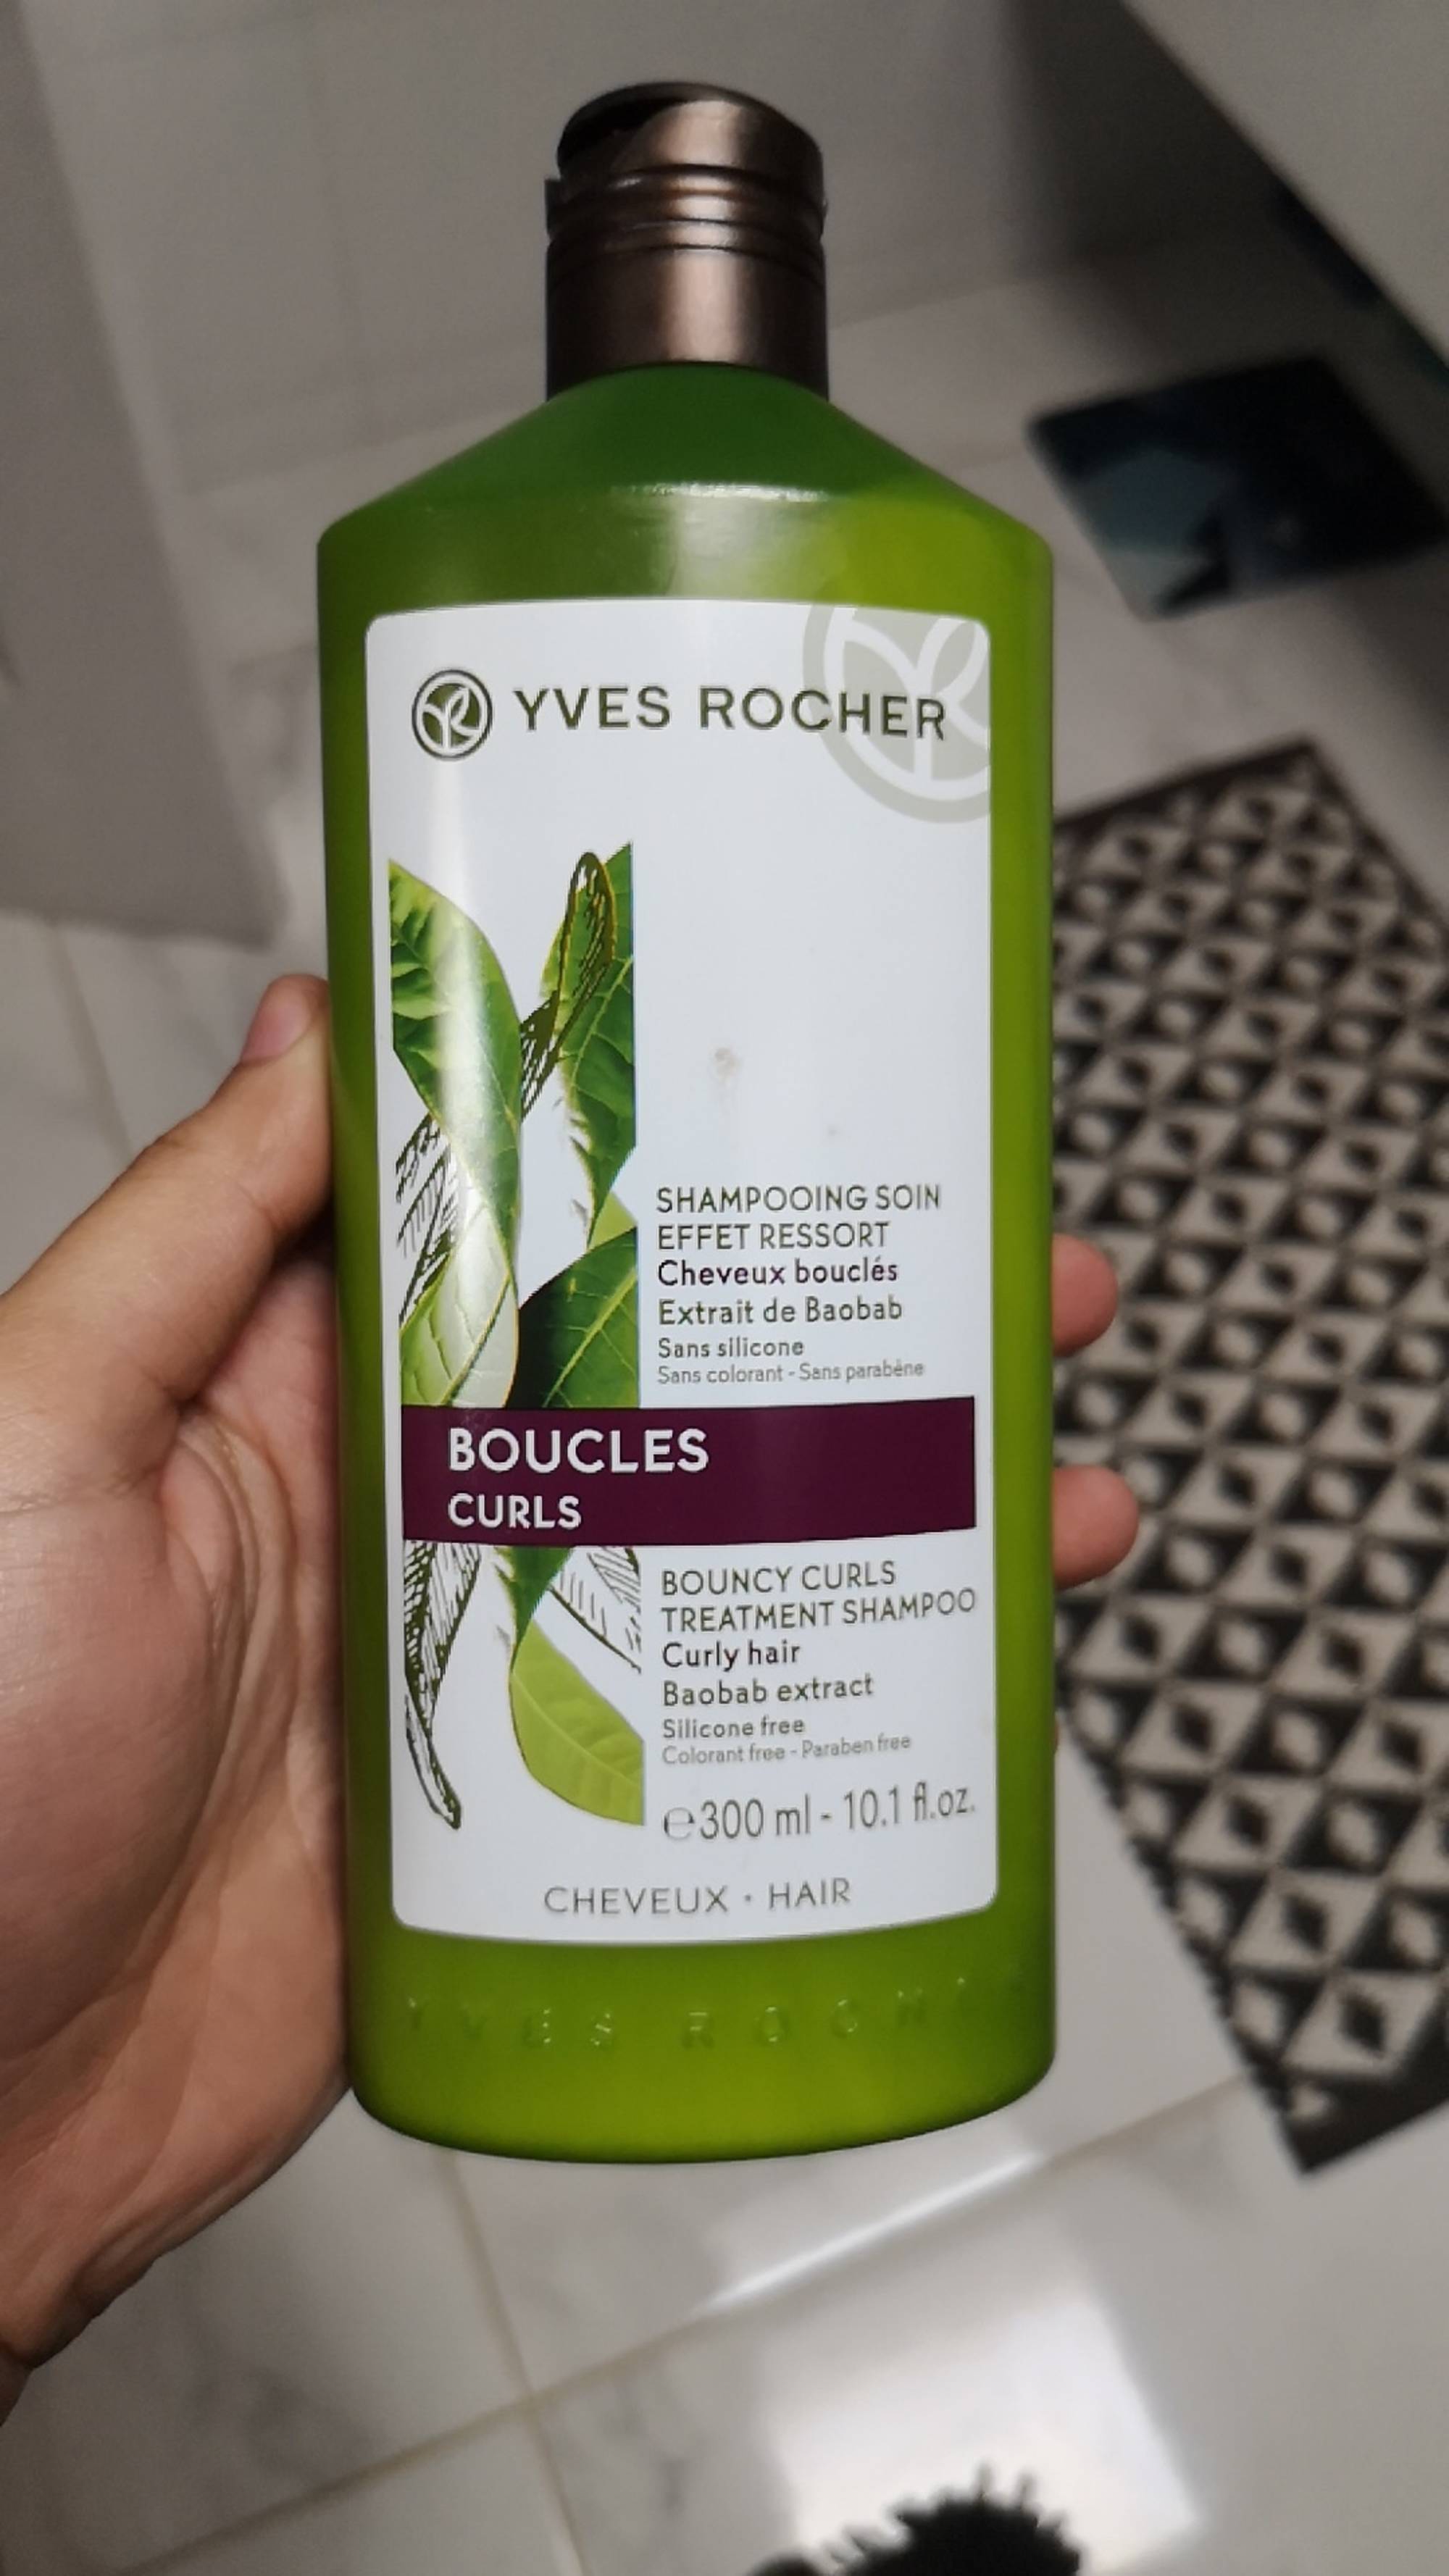 YVES ROCHER - Boucles - Shampooing soin effet ressort 